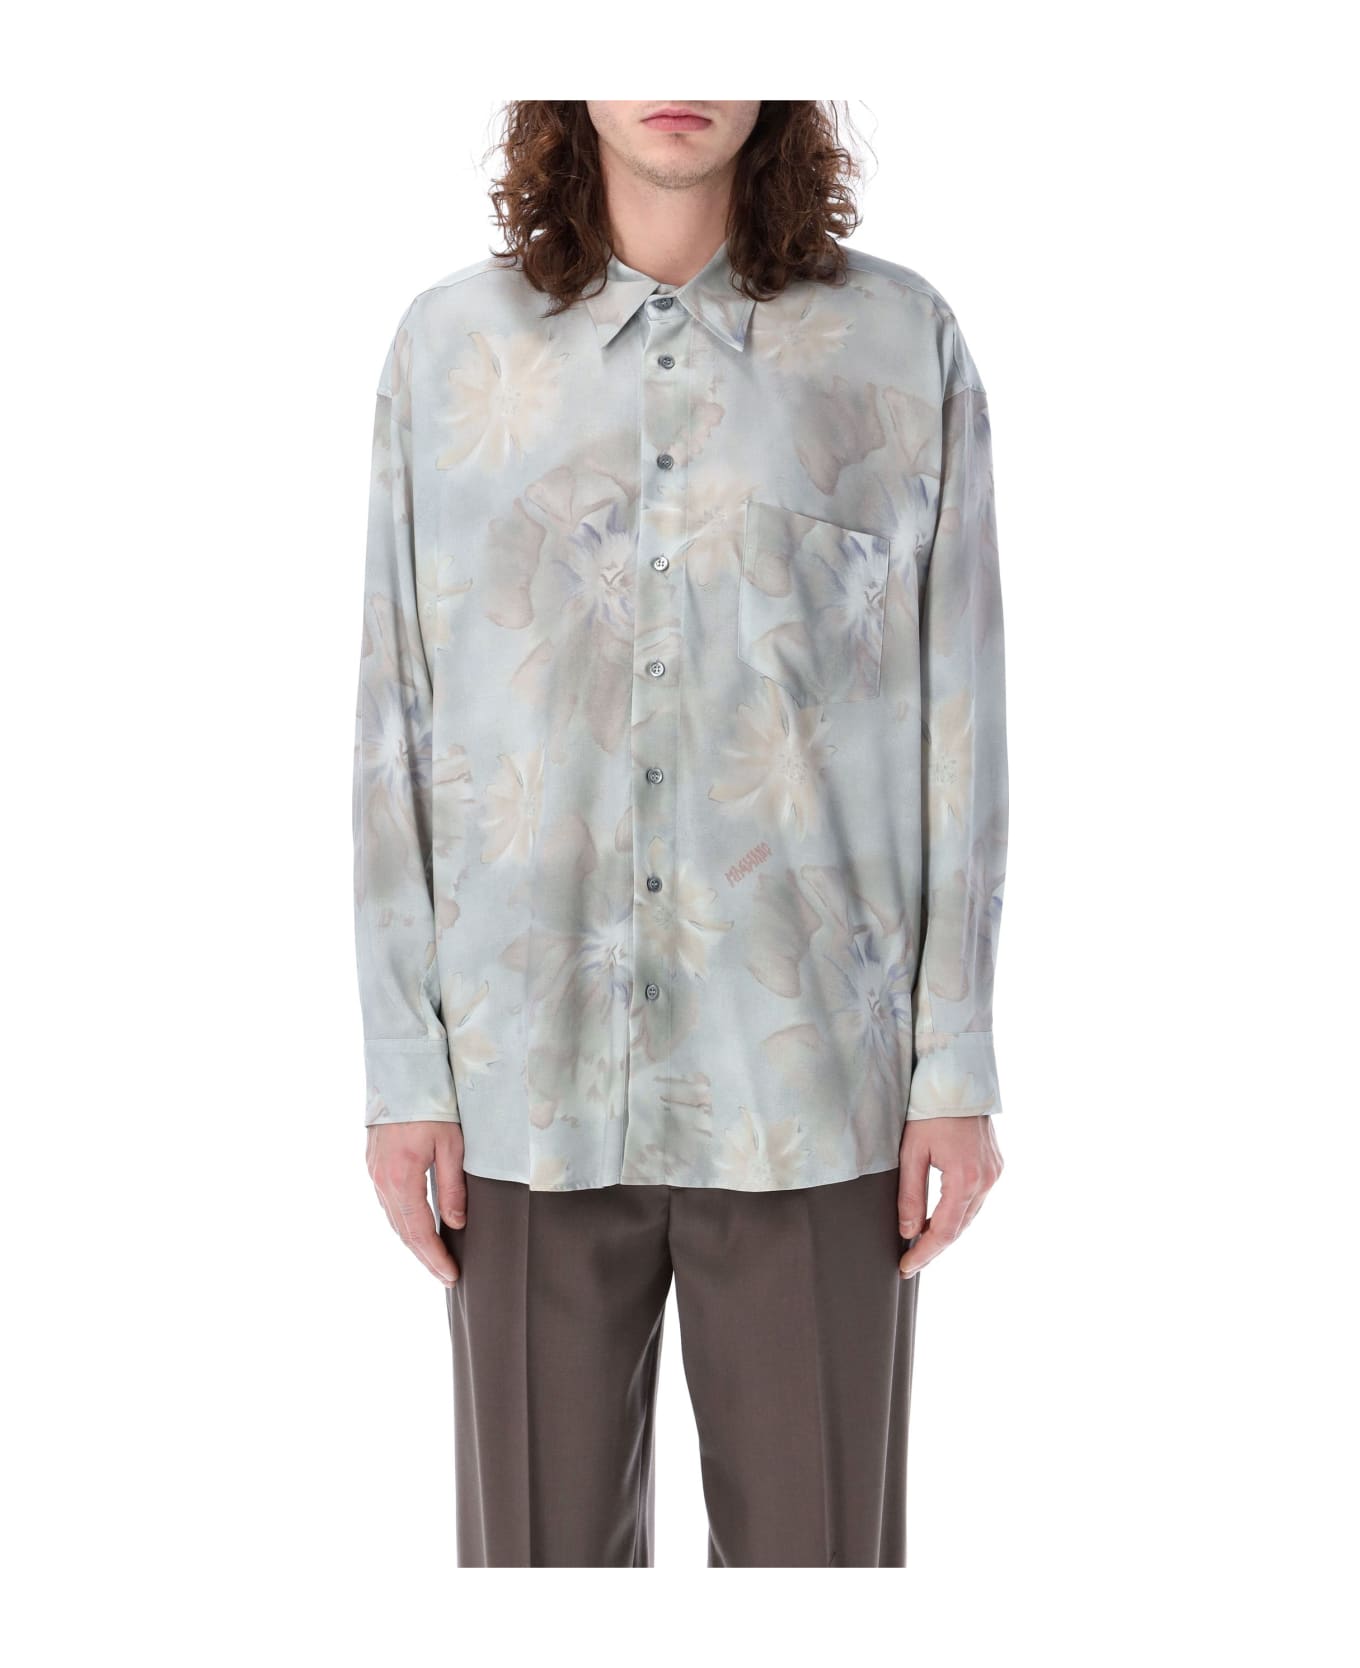 Magliano Flower Shirt - PALE BLUE